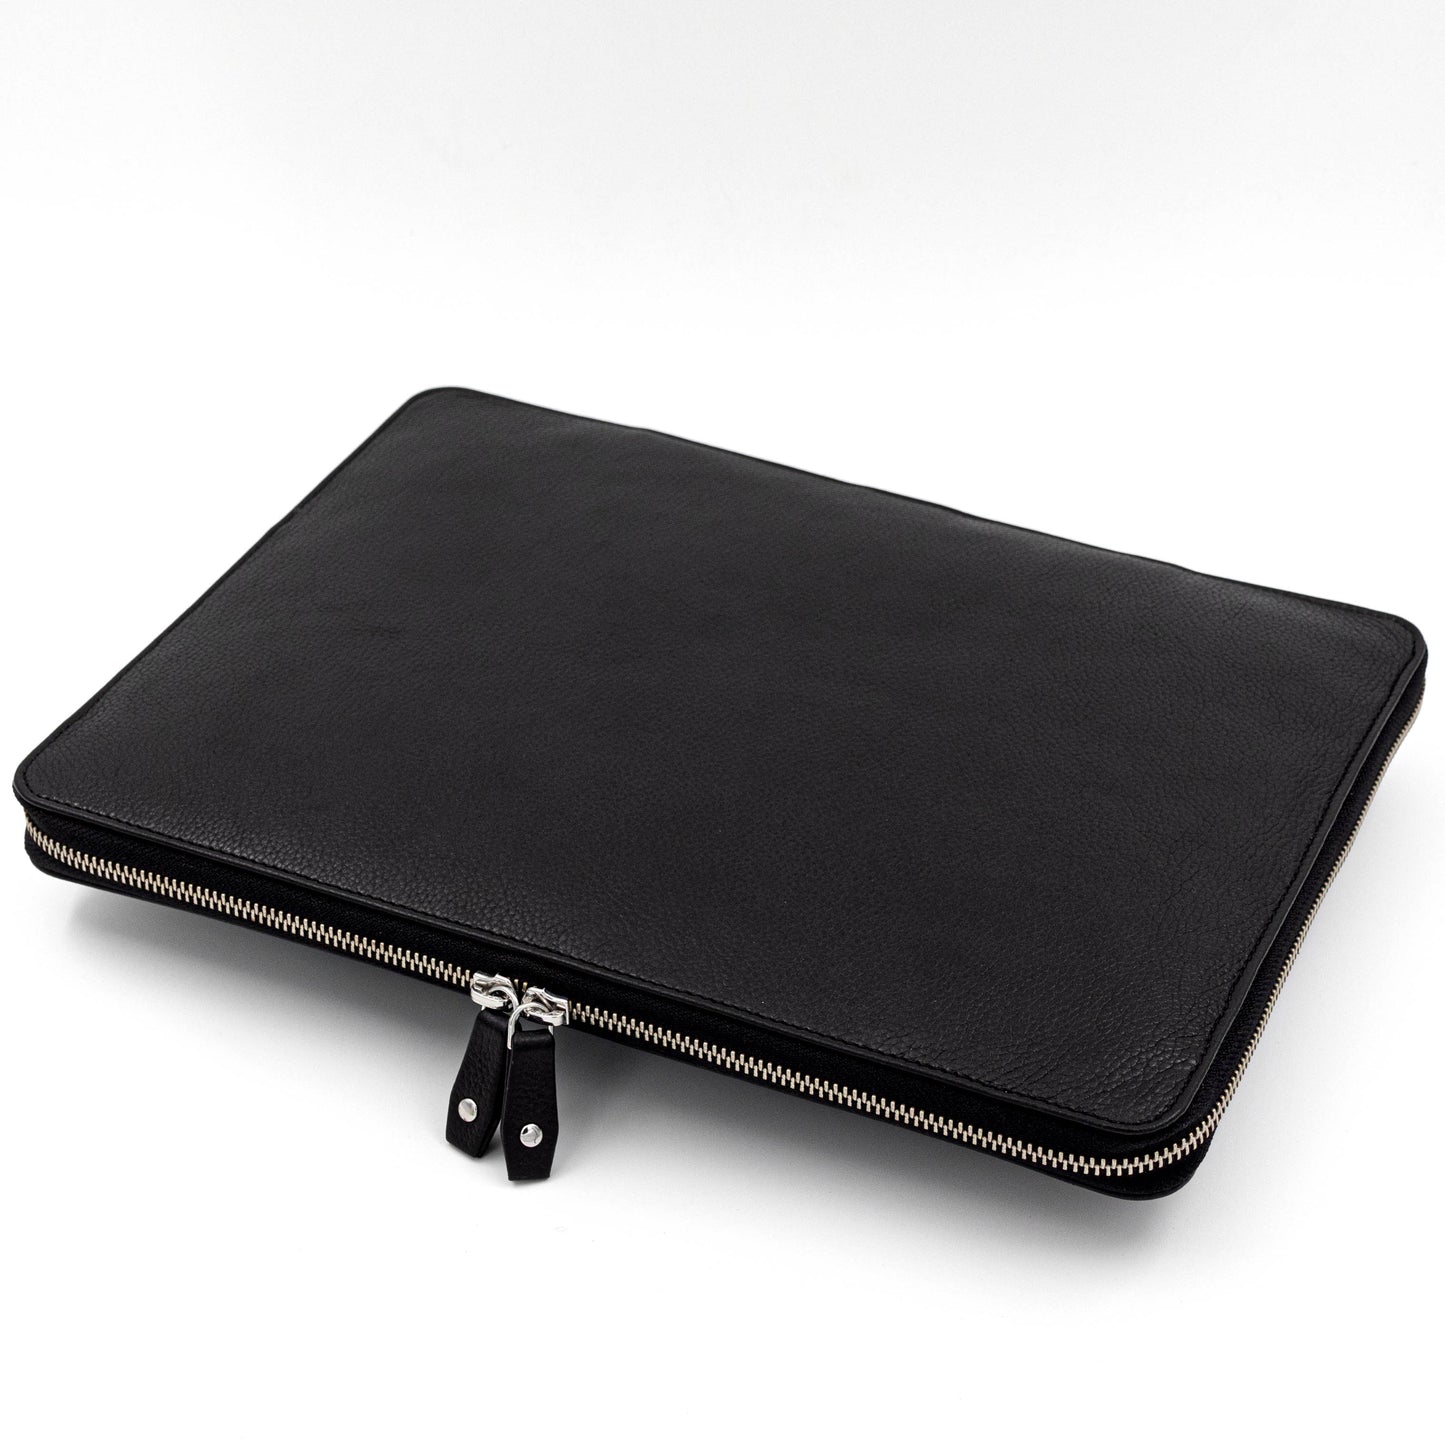 Leather case for surface pro in black. The leather is pebble grained in texture that makes it resistant to everyday wear and tear